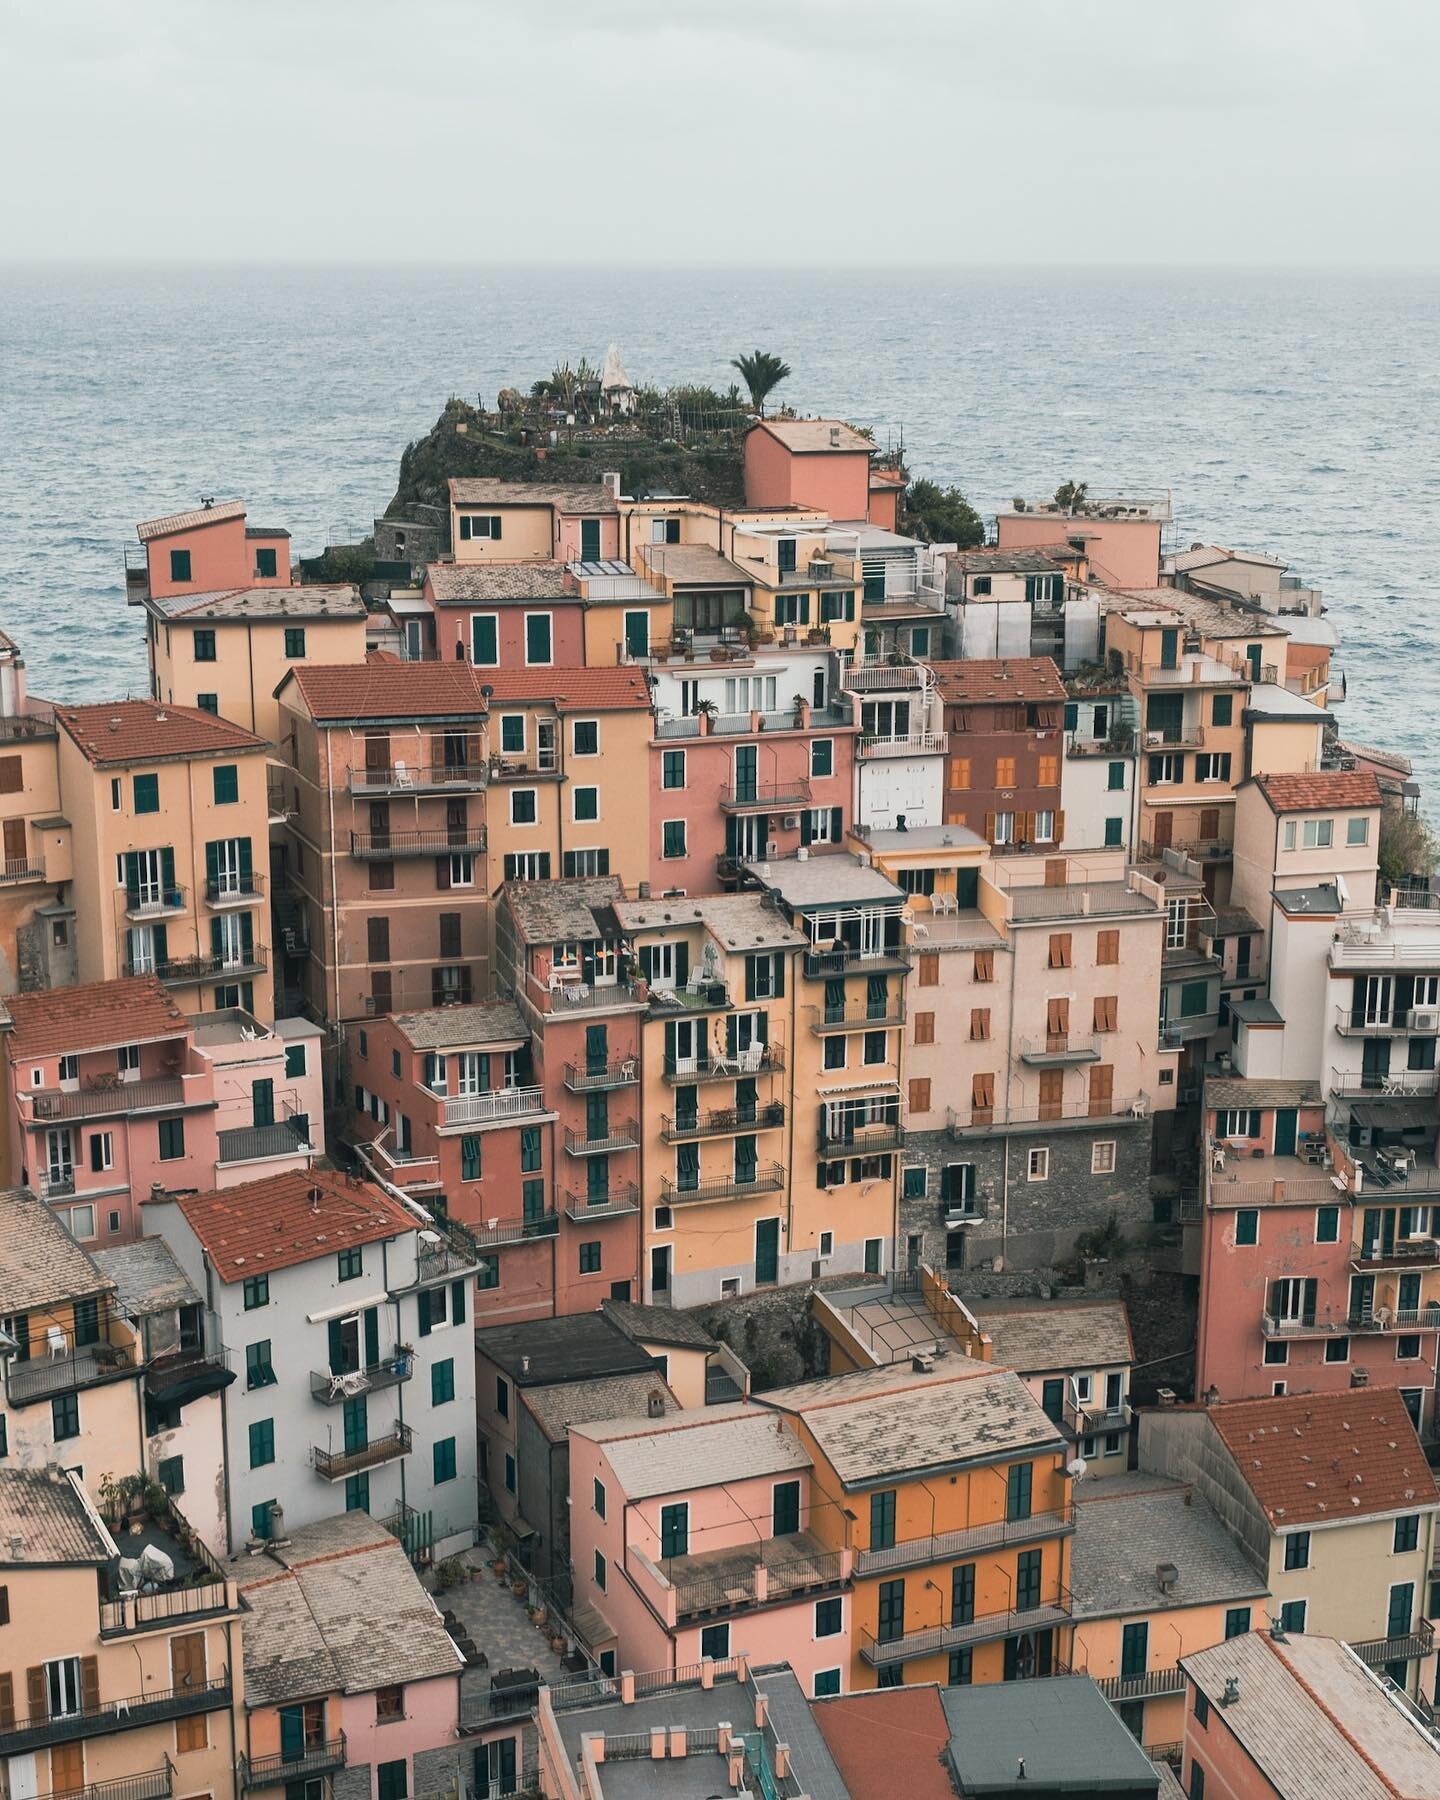 Tightly packed, Italian houses, look over stunning coast of the Chinqua terra. 

Many of these towns are overrun with photographers, particularly around, sunset. It&rsquo;s quite comical and slightly sad as all these people jostle for position to get